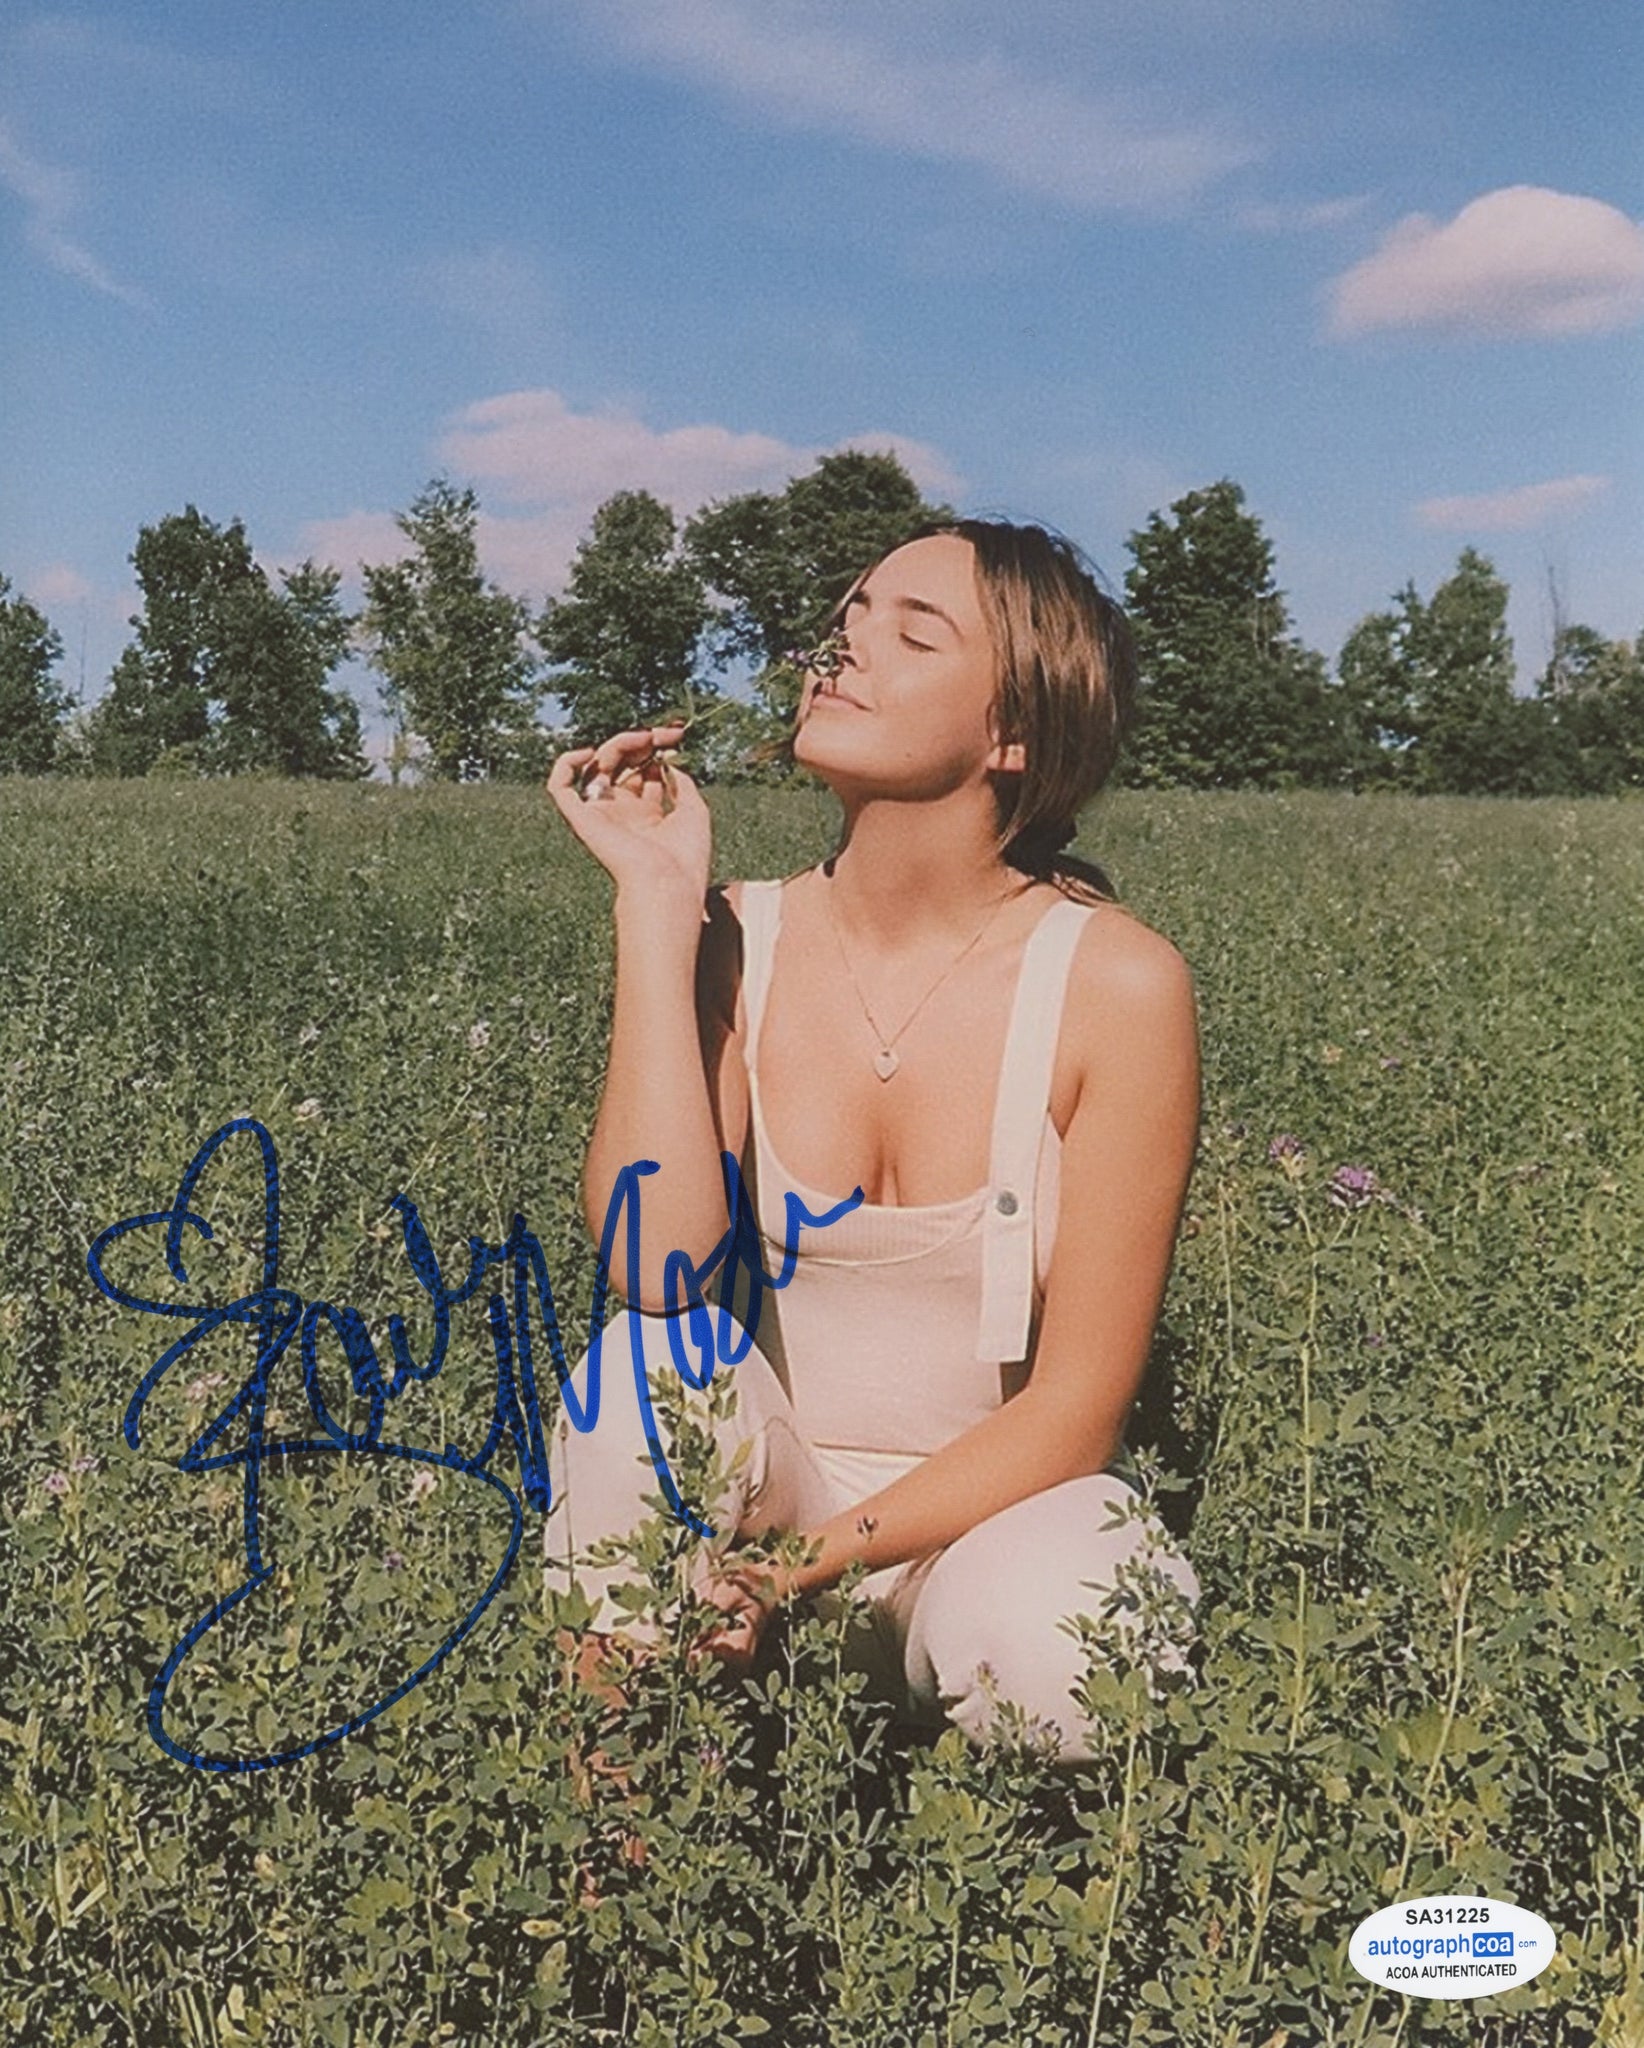 Bailee Madison Sexy Signed Autograph 8x10 Photo ACOA #17 - Outlaw Hobbies Authentic Autographs